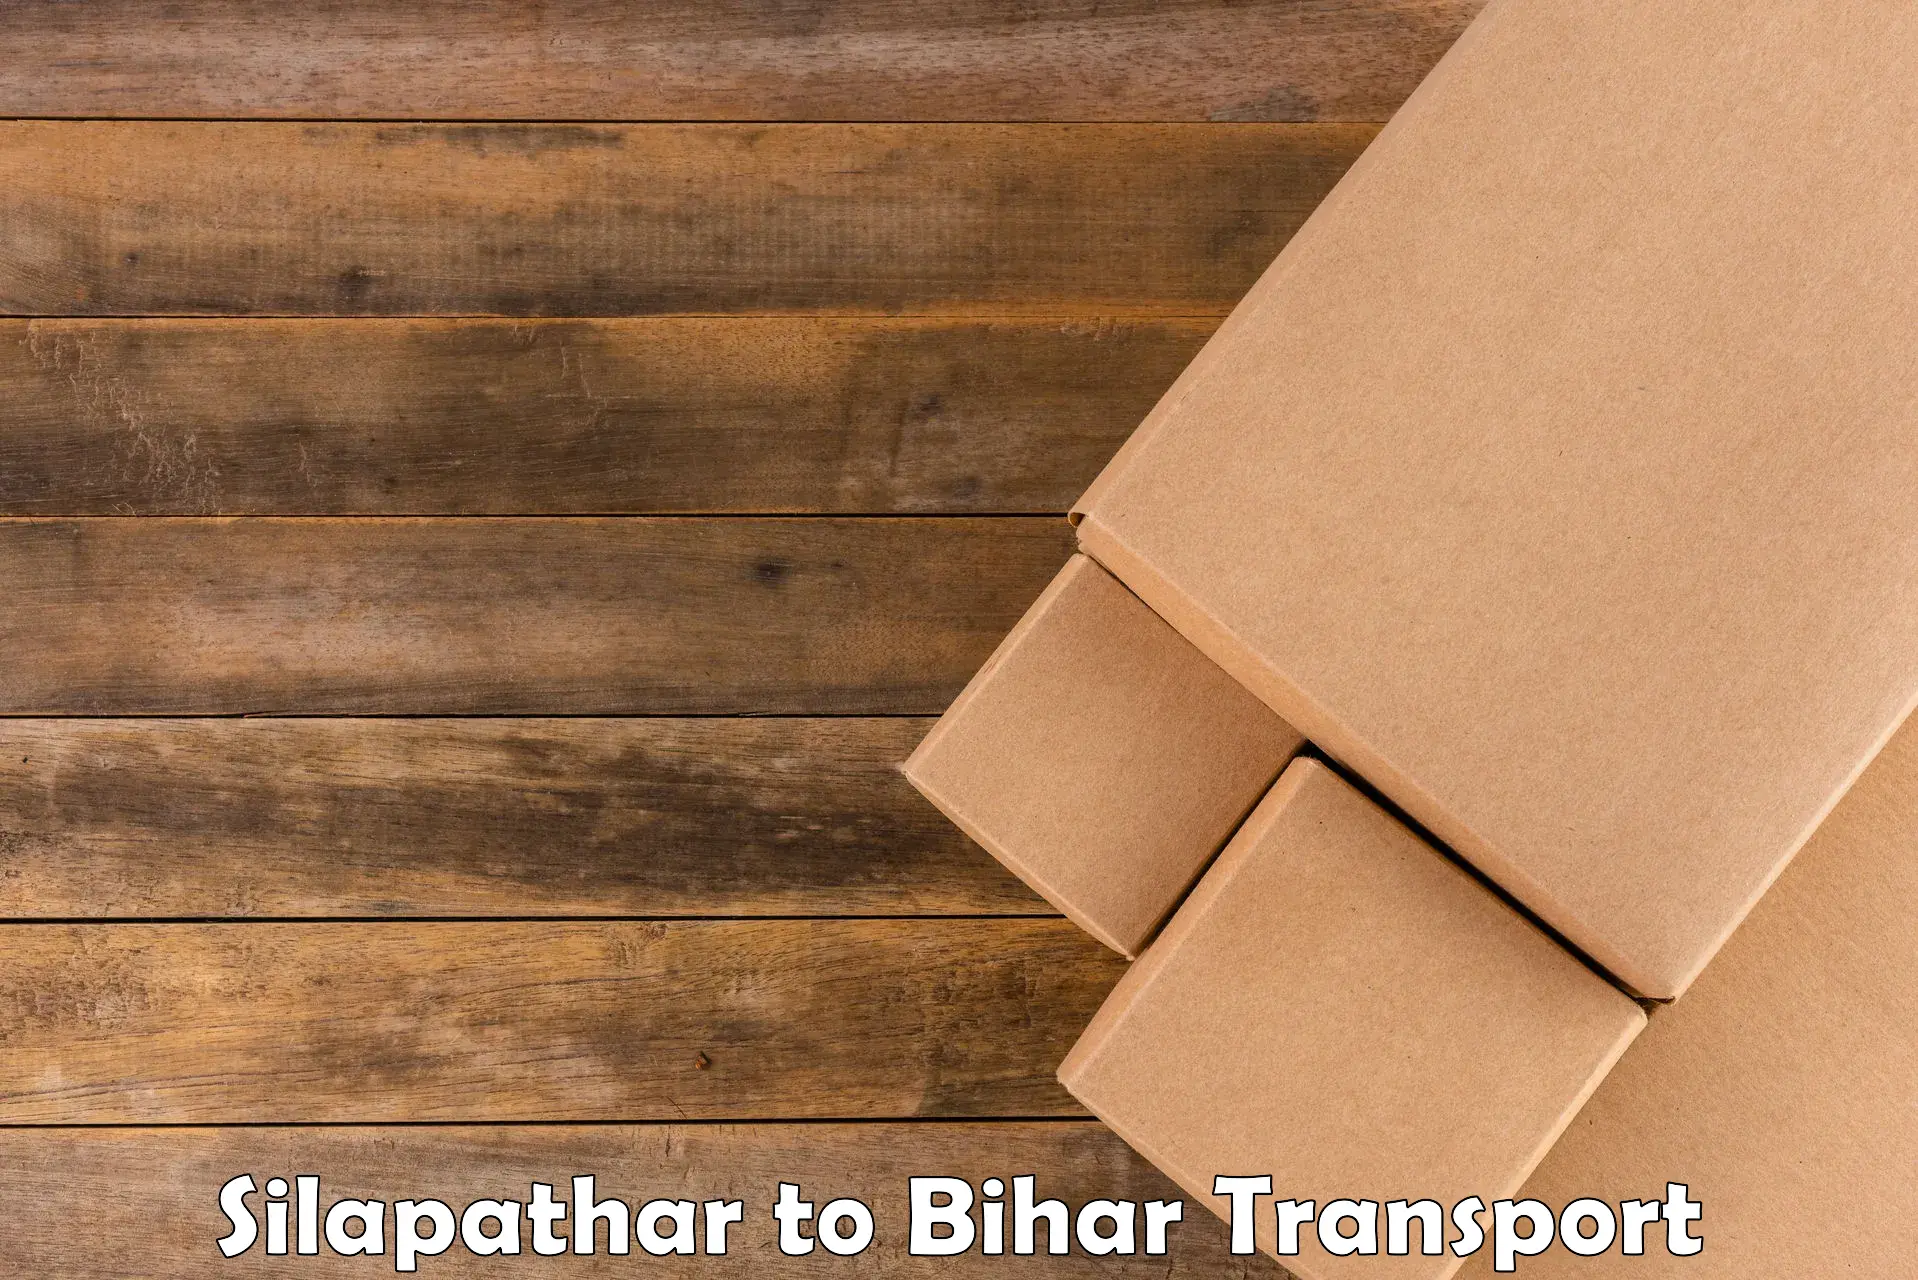 Container transportation services Silapathar to Maheshkhunt